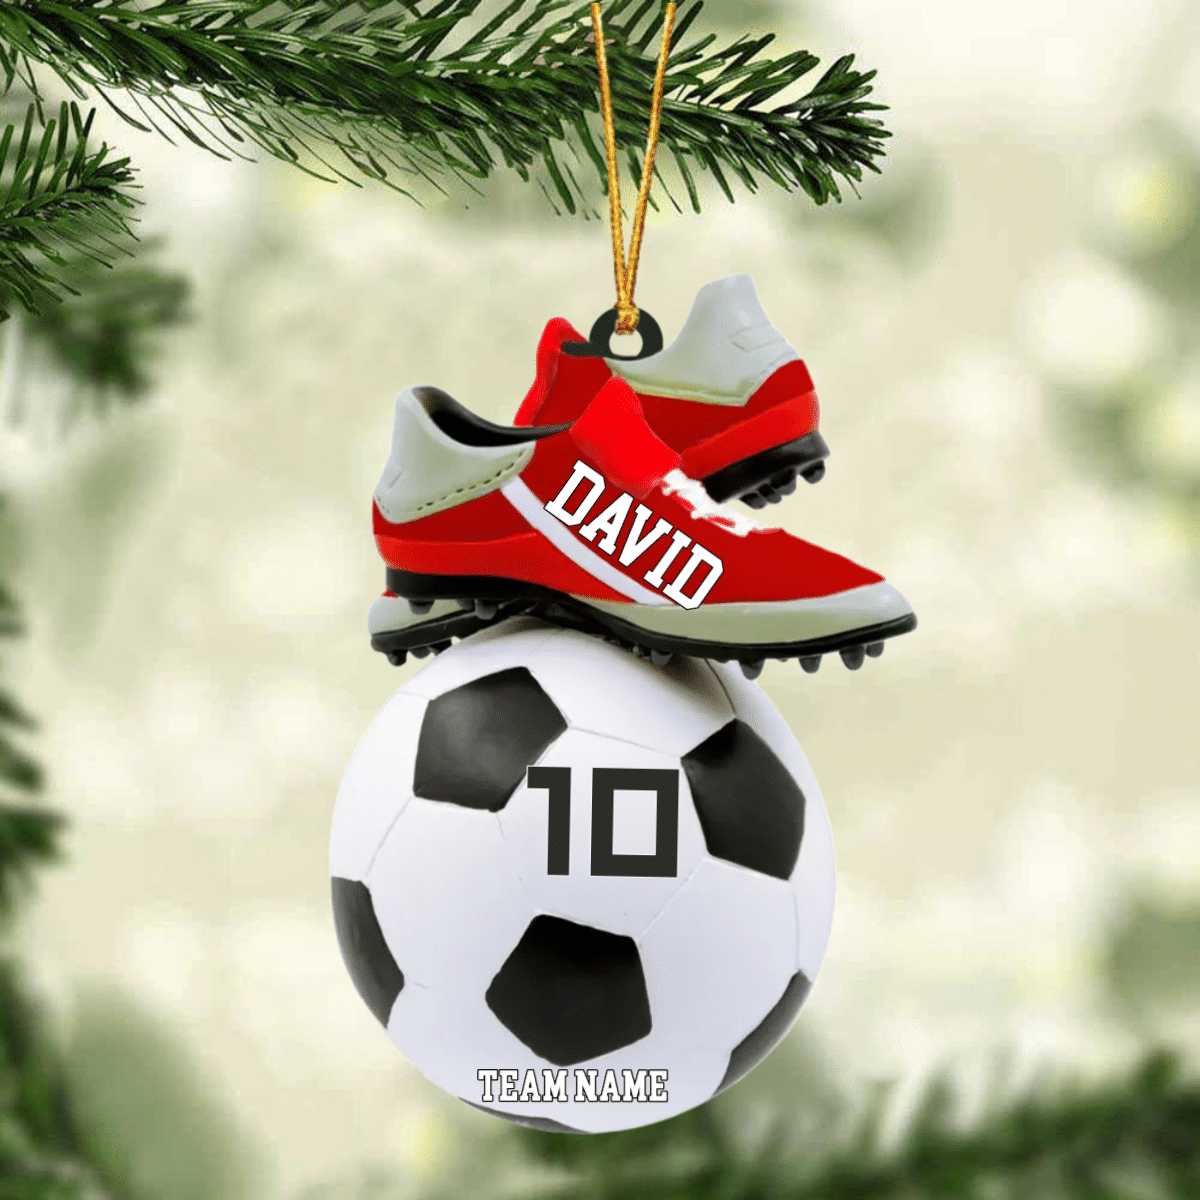 2022 Personalized Soccer Christmas Ornament - Great Gift Idea For Soccer Players & Soccer Lovers